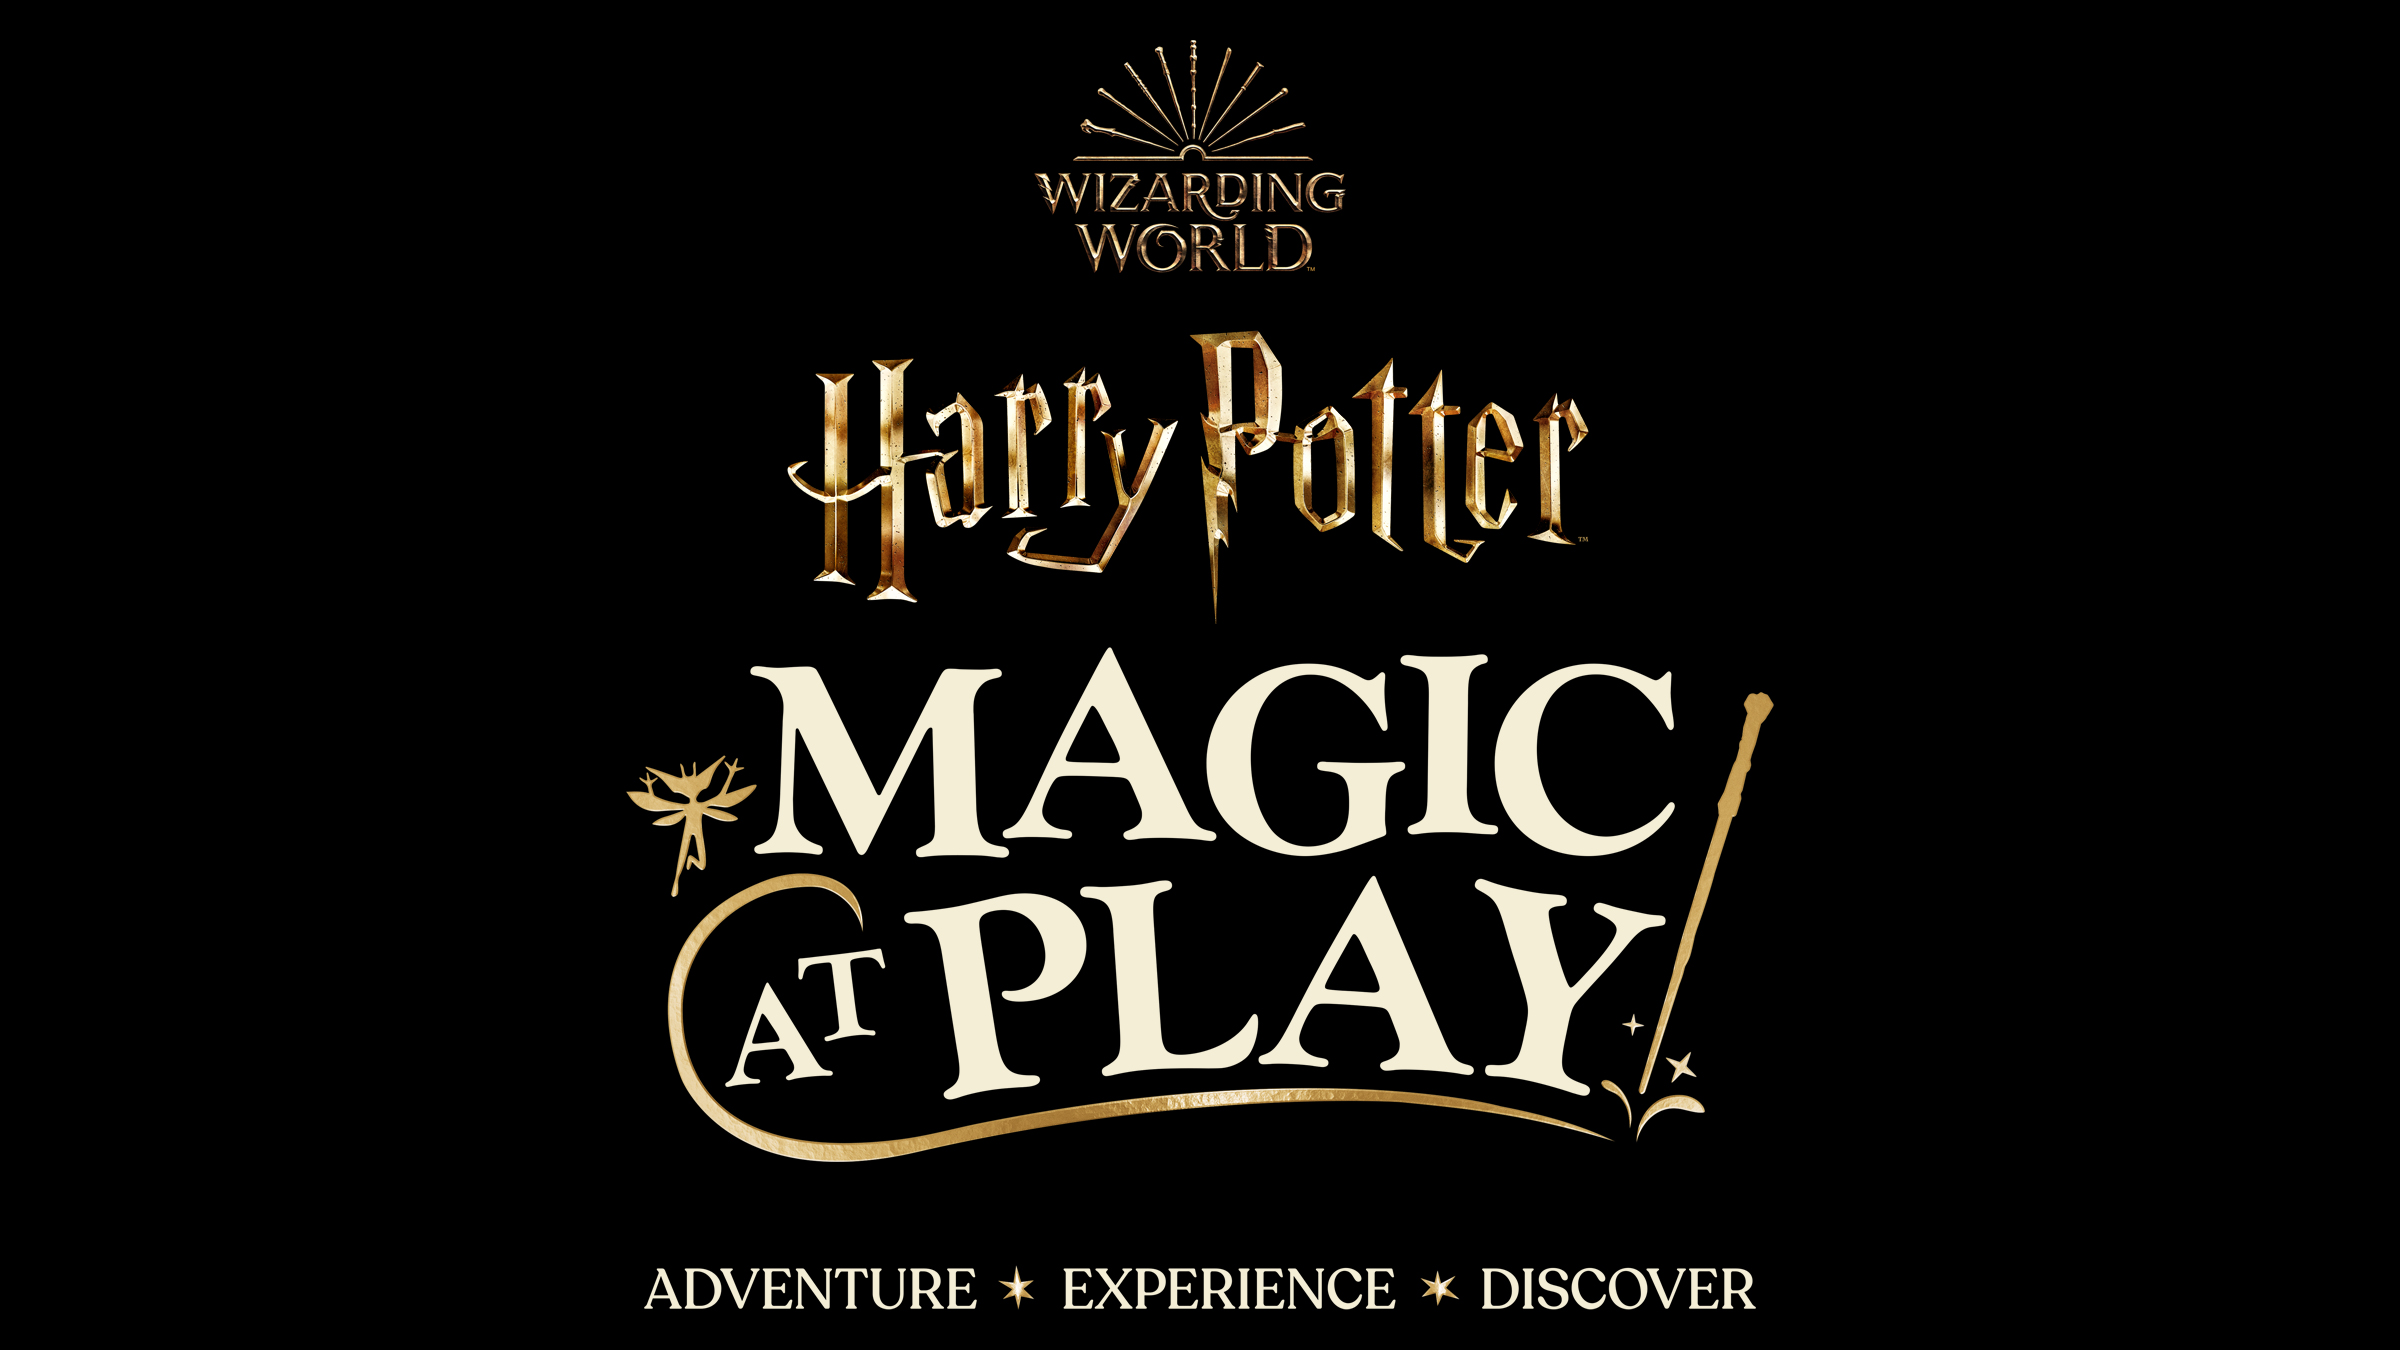 Learn more about Magic at Play